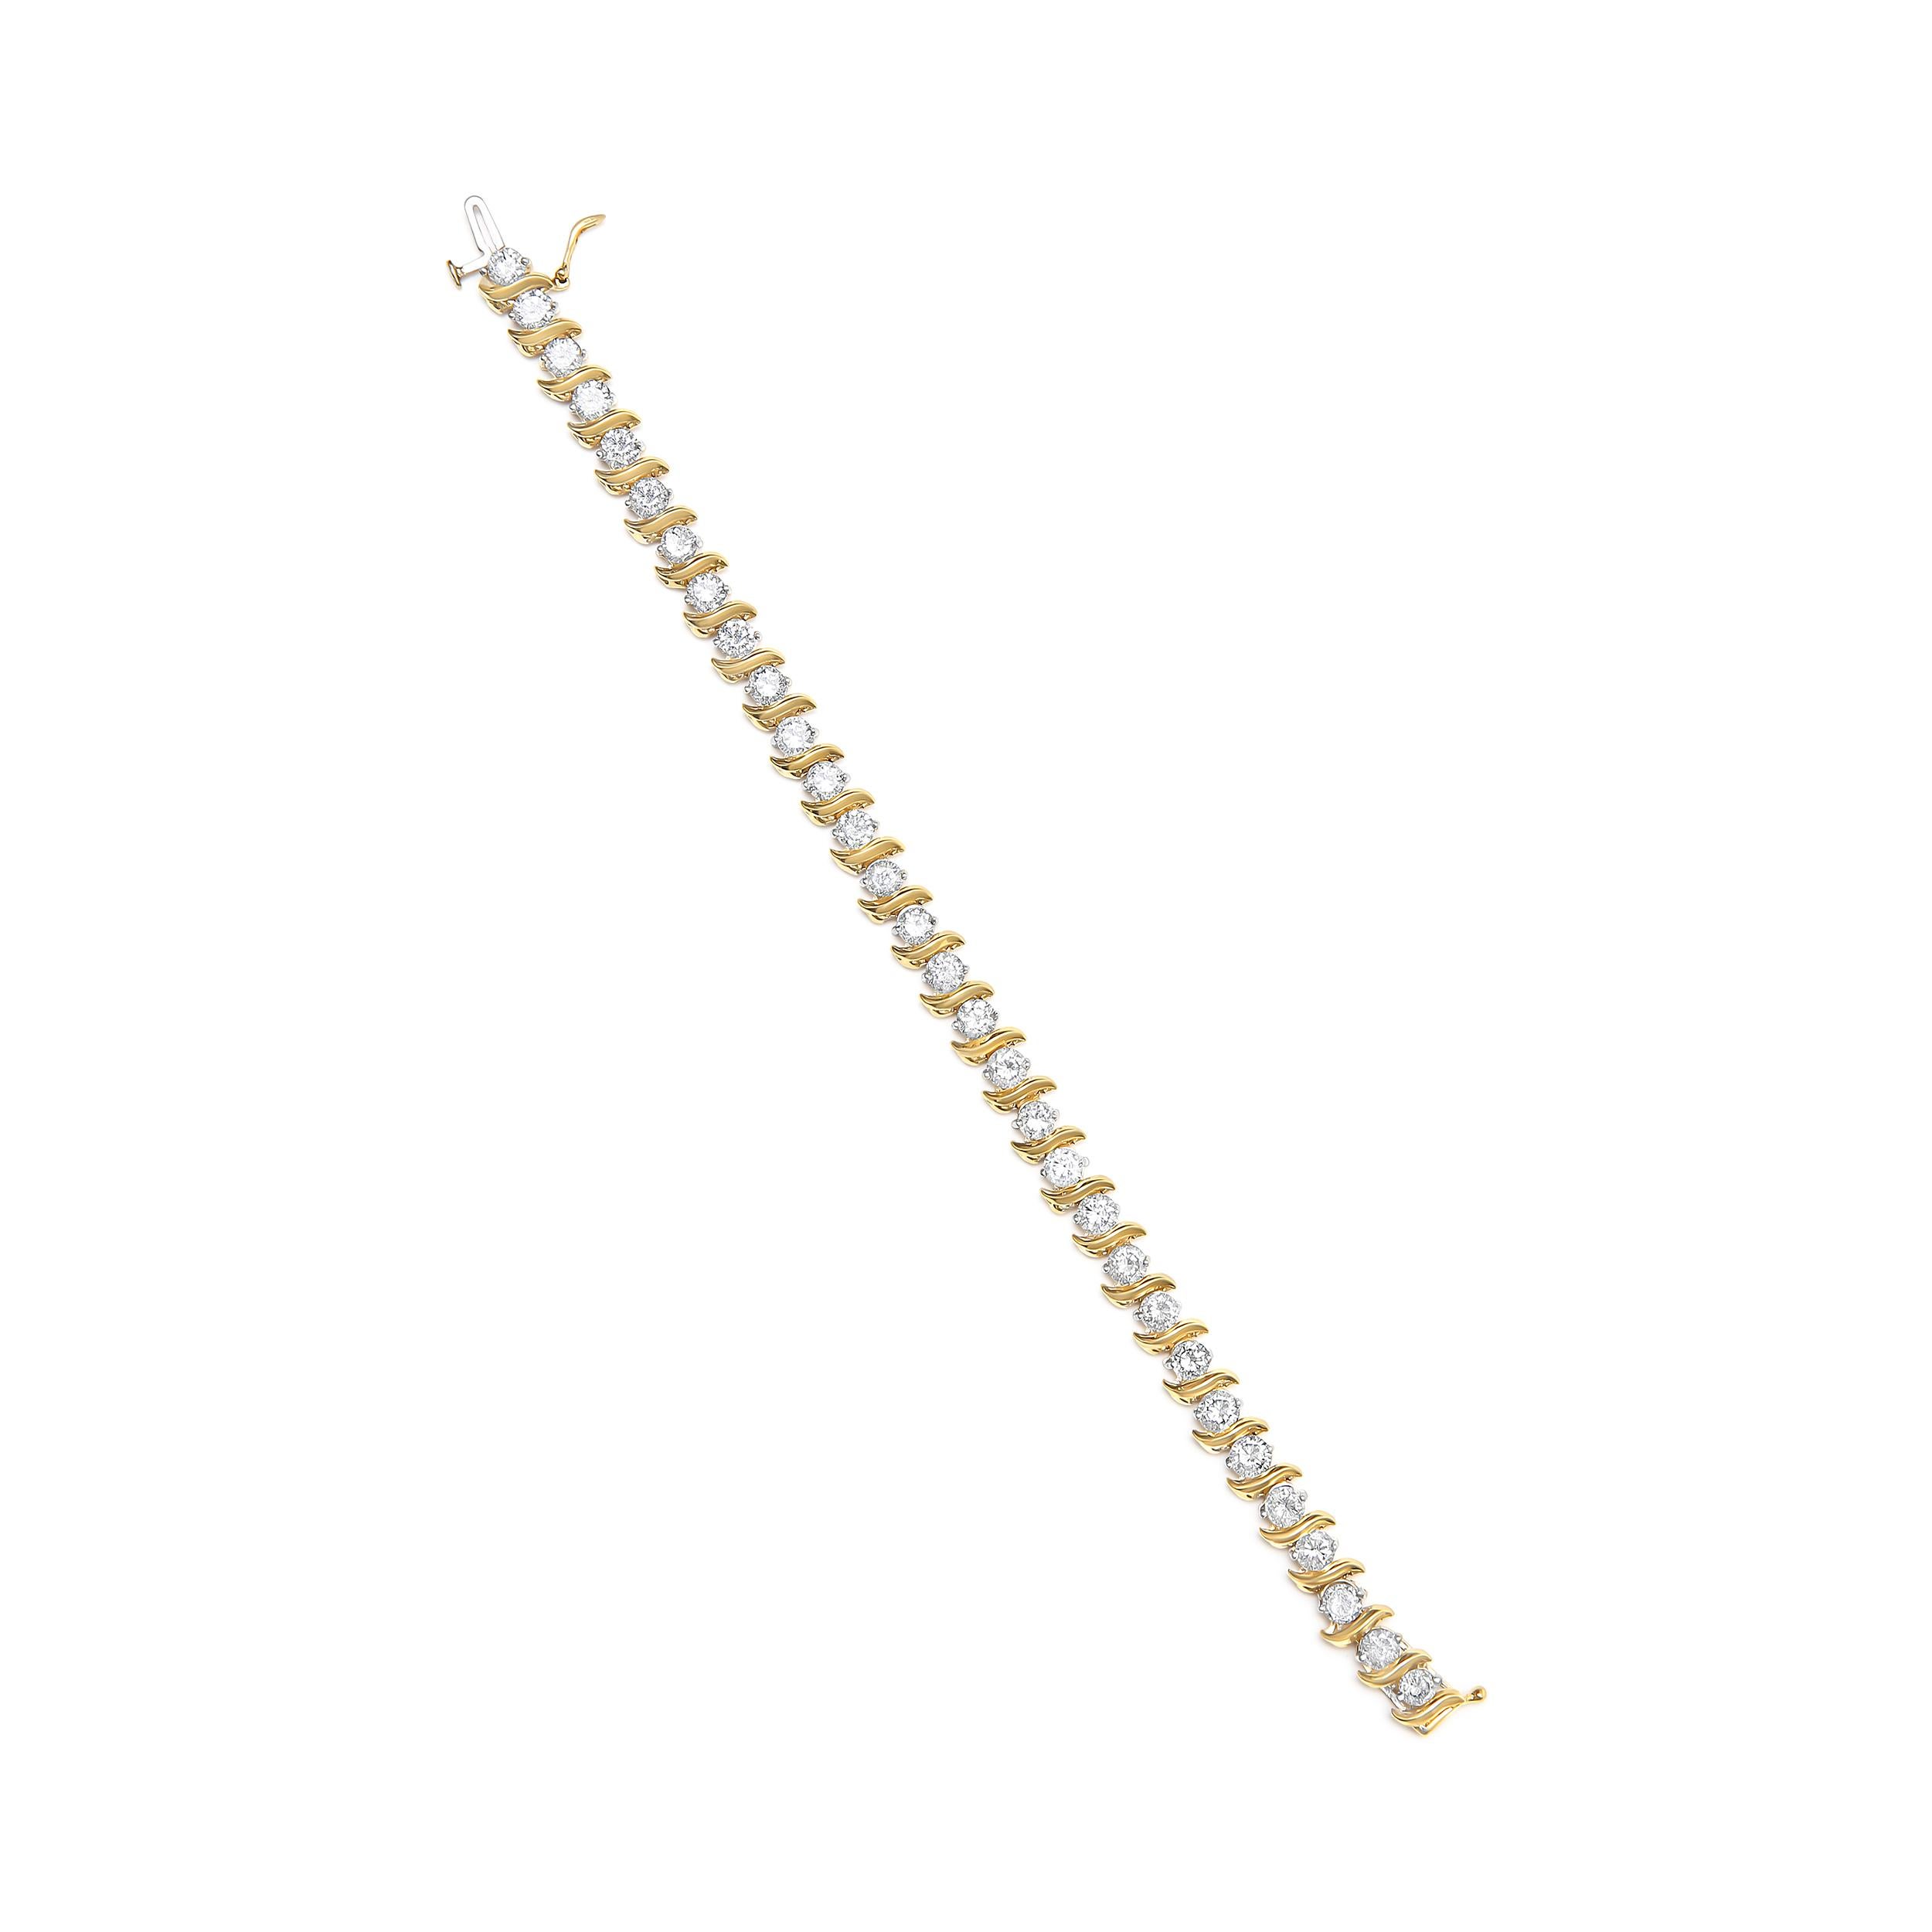 Make a bold and stunning statement with this magnificent 14K yellow gold S-link bracelet. The piece showcases 31 natural round cut diamonds, weighing in at a magnificent 10.0 carats. The diamonds boast a warm J-K color and a clarity of SI2-I1,